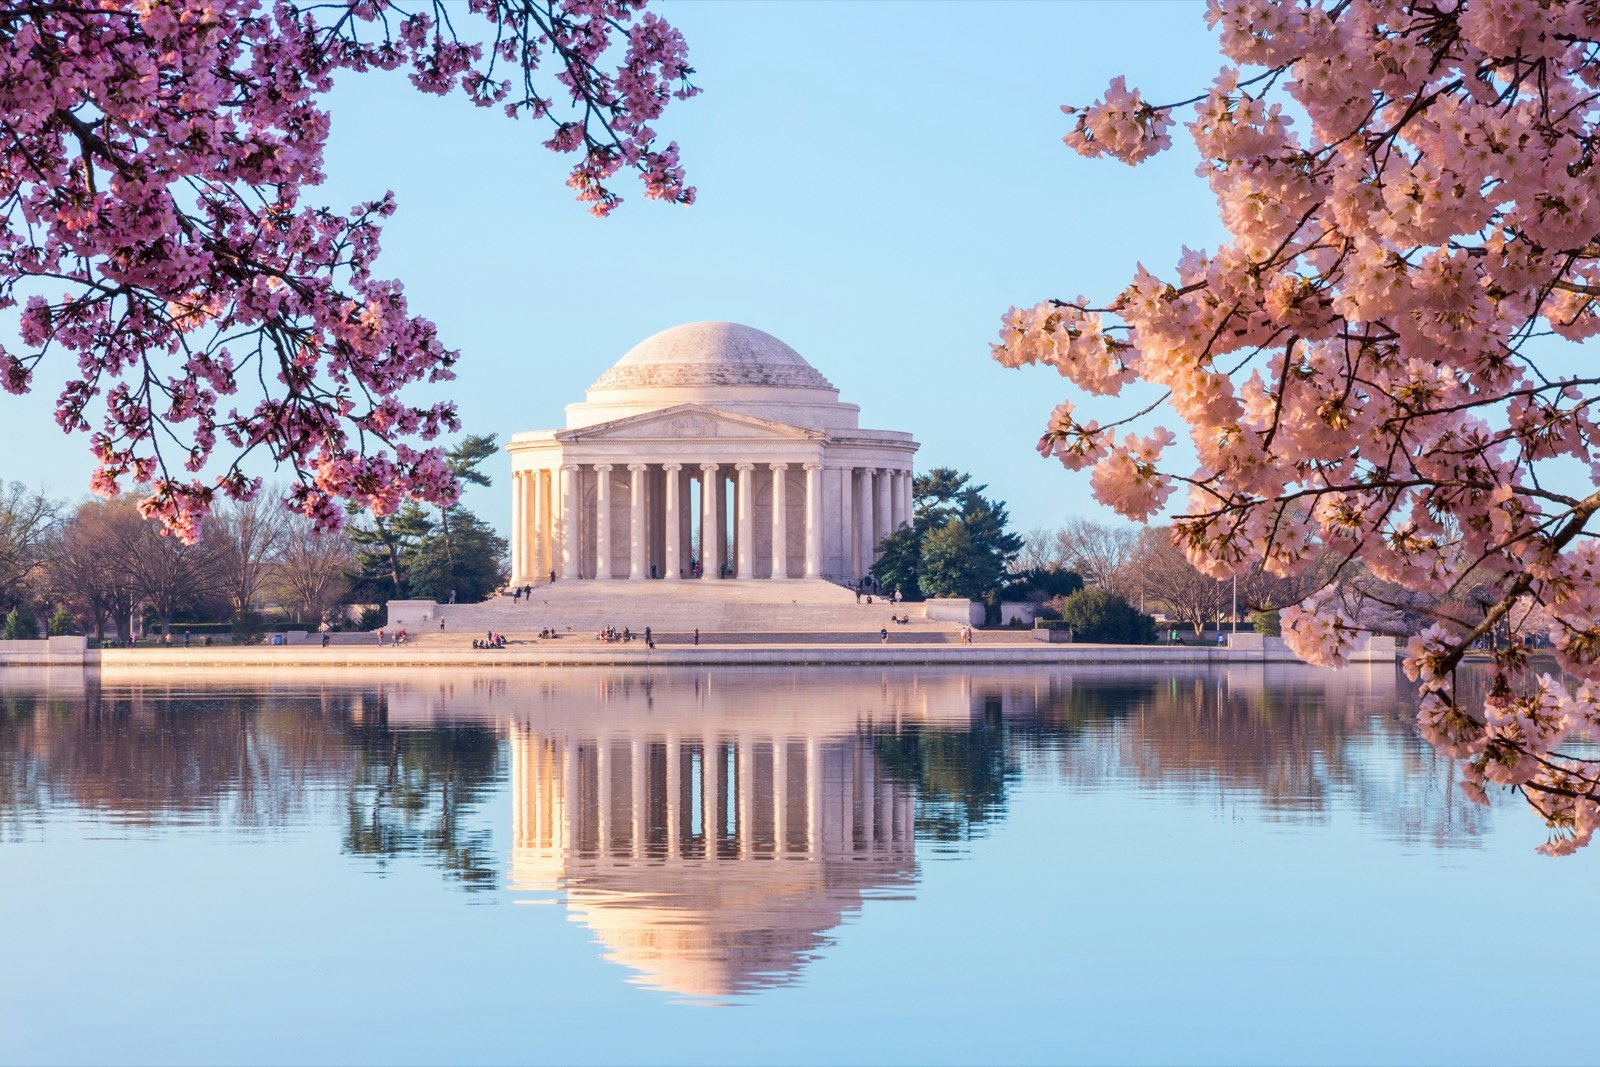 Celebrate the 110th anniversary of the National Cherry Blossom Festival